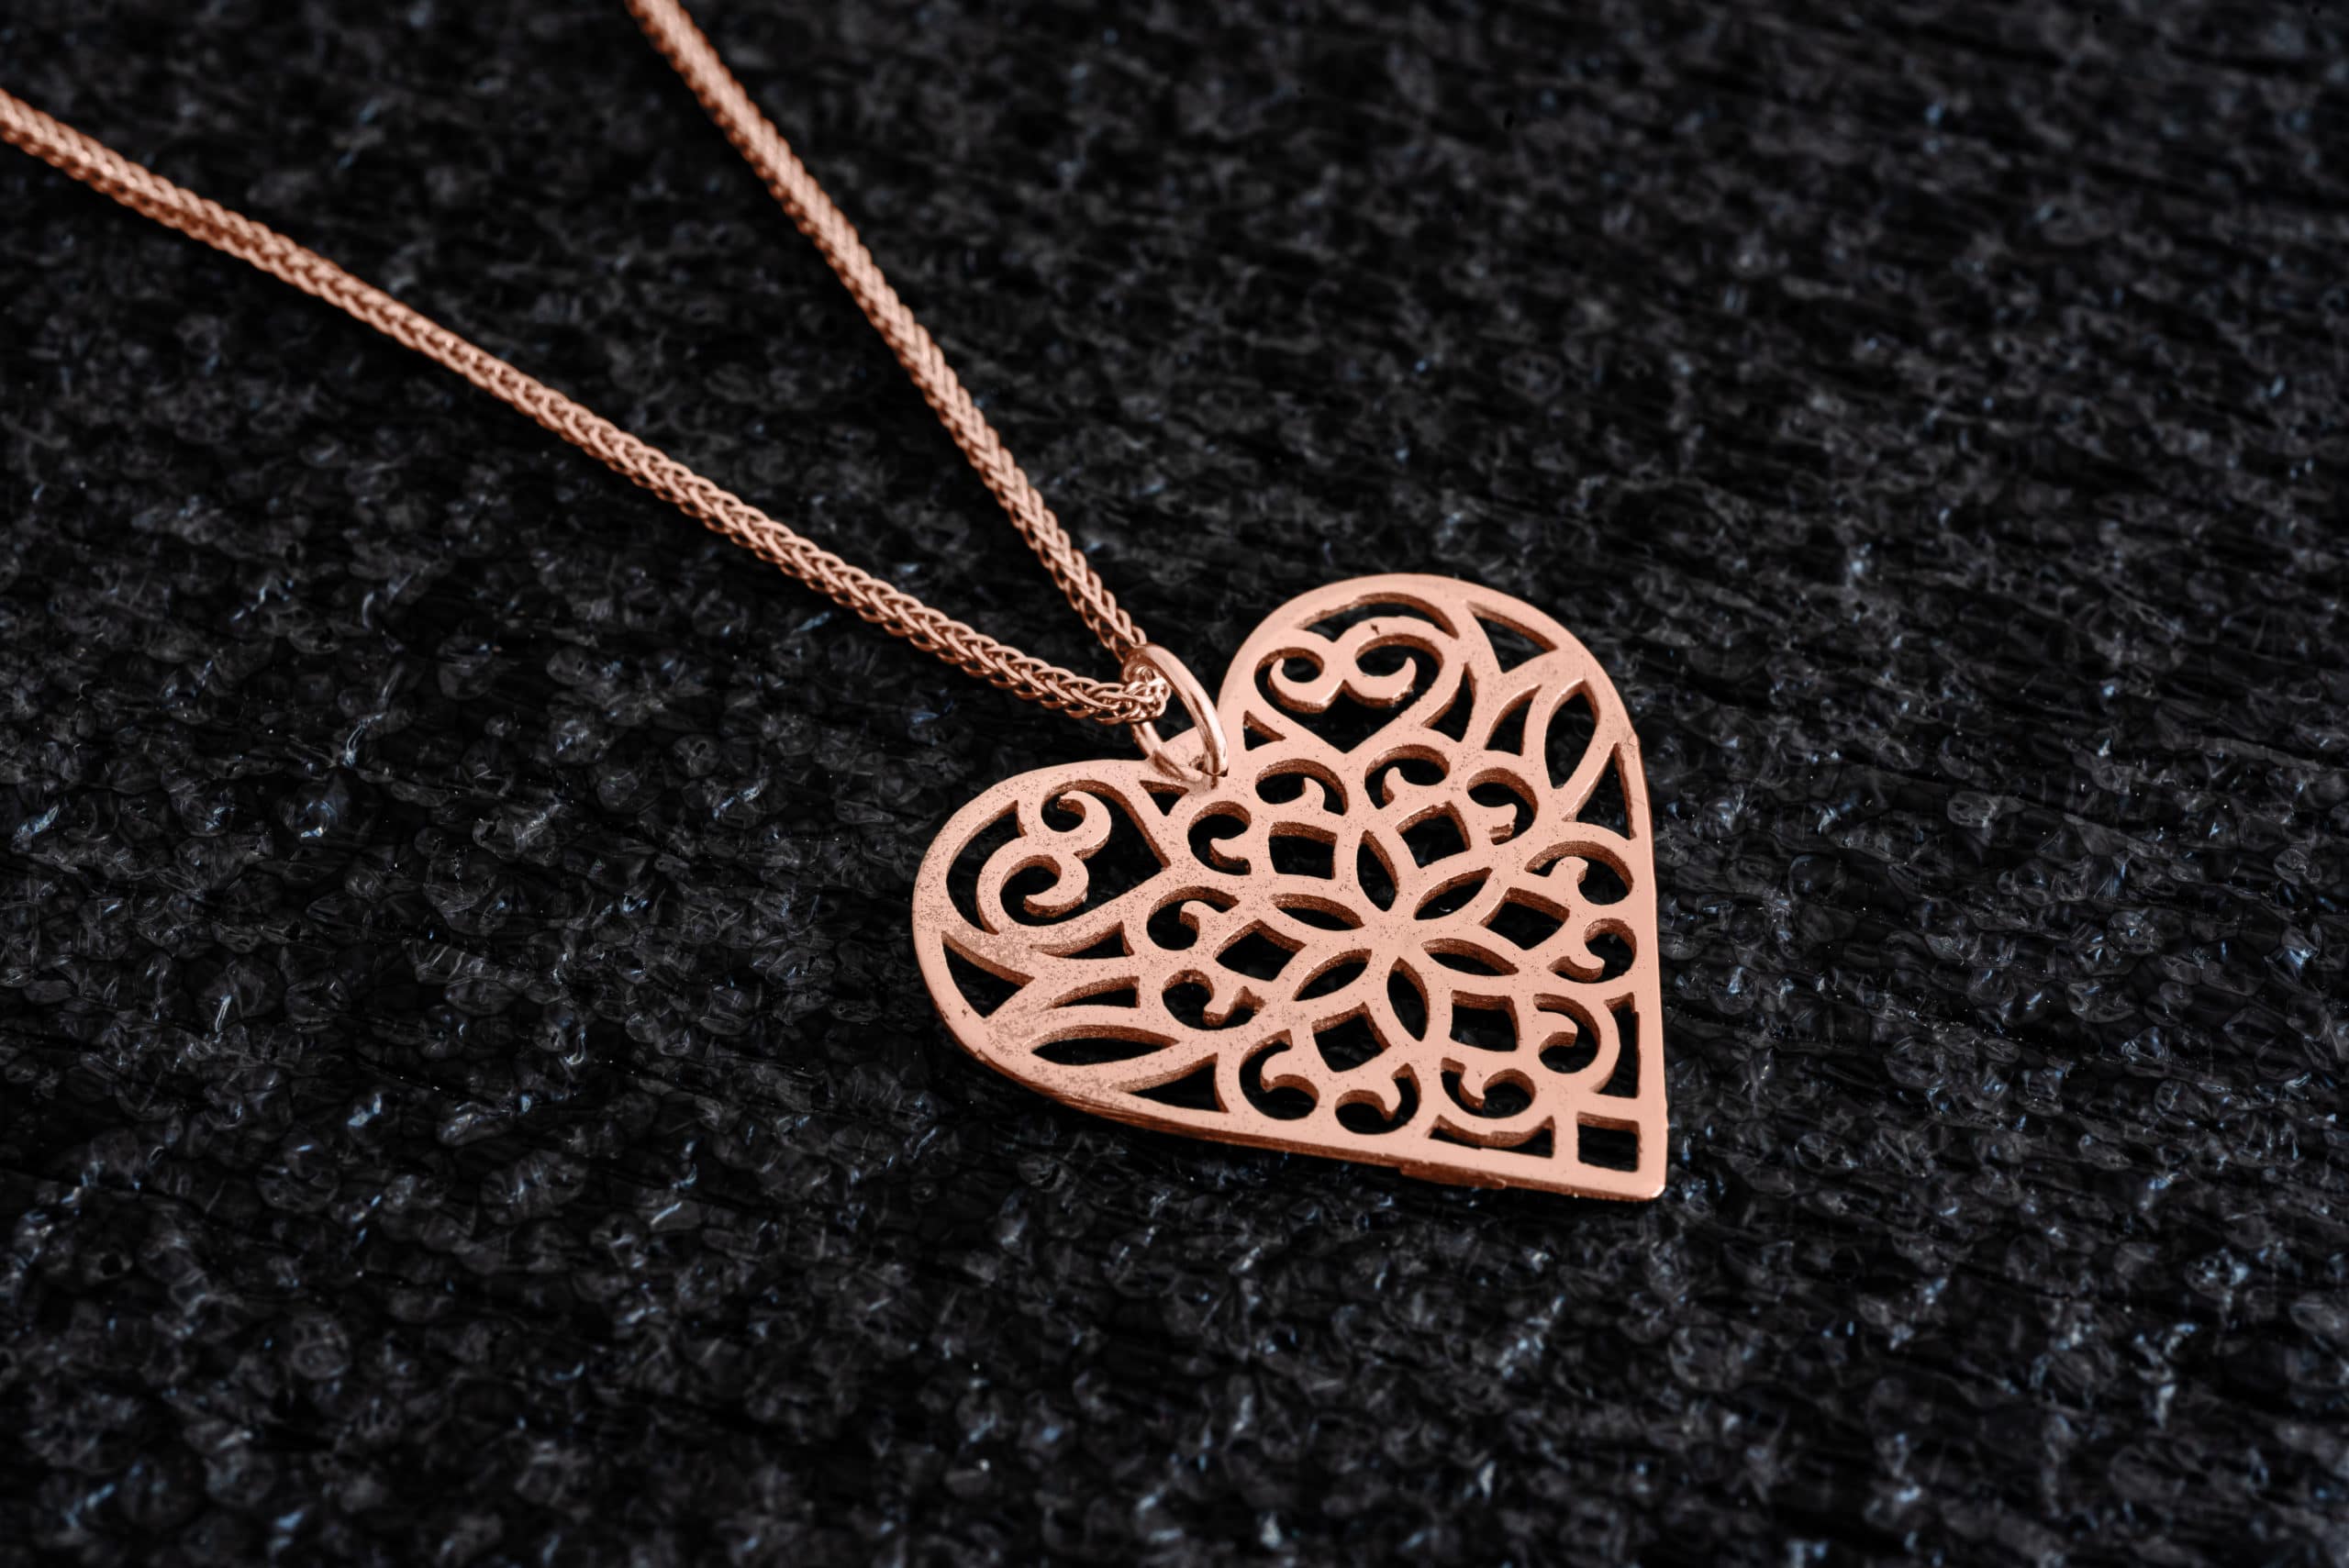 14K Gold Hollow Heart Necklace in Filigree